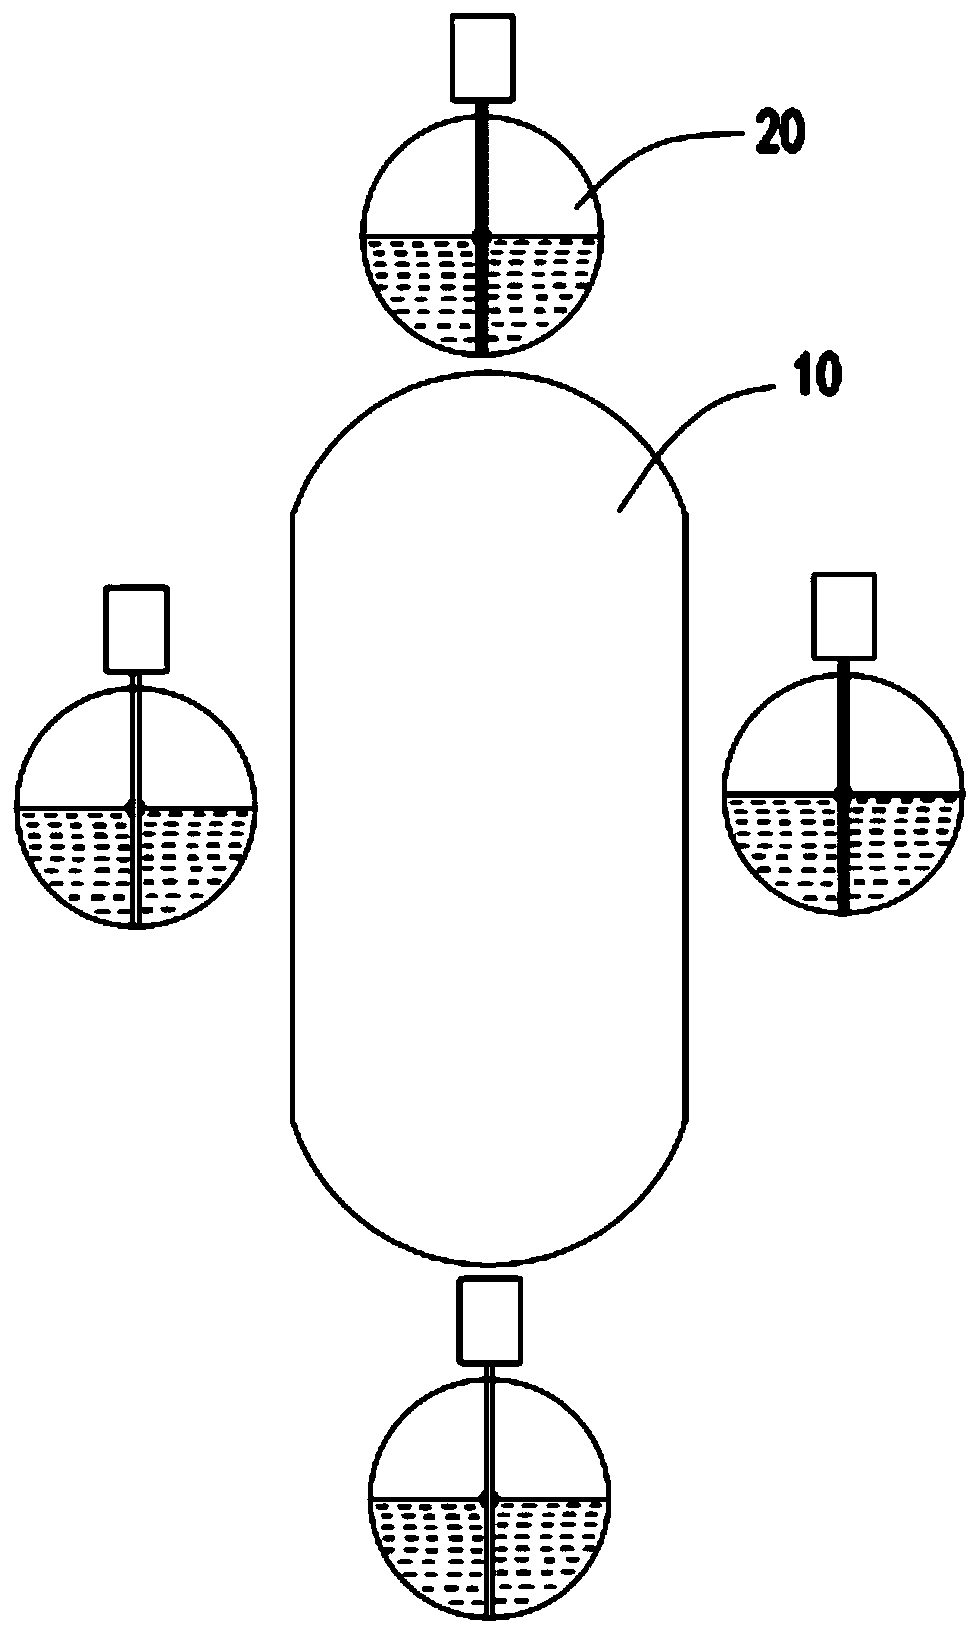 Buoyancy and attitude adjustment integrated system of manned submersible